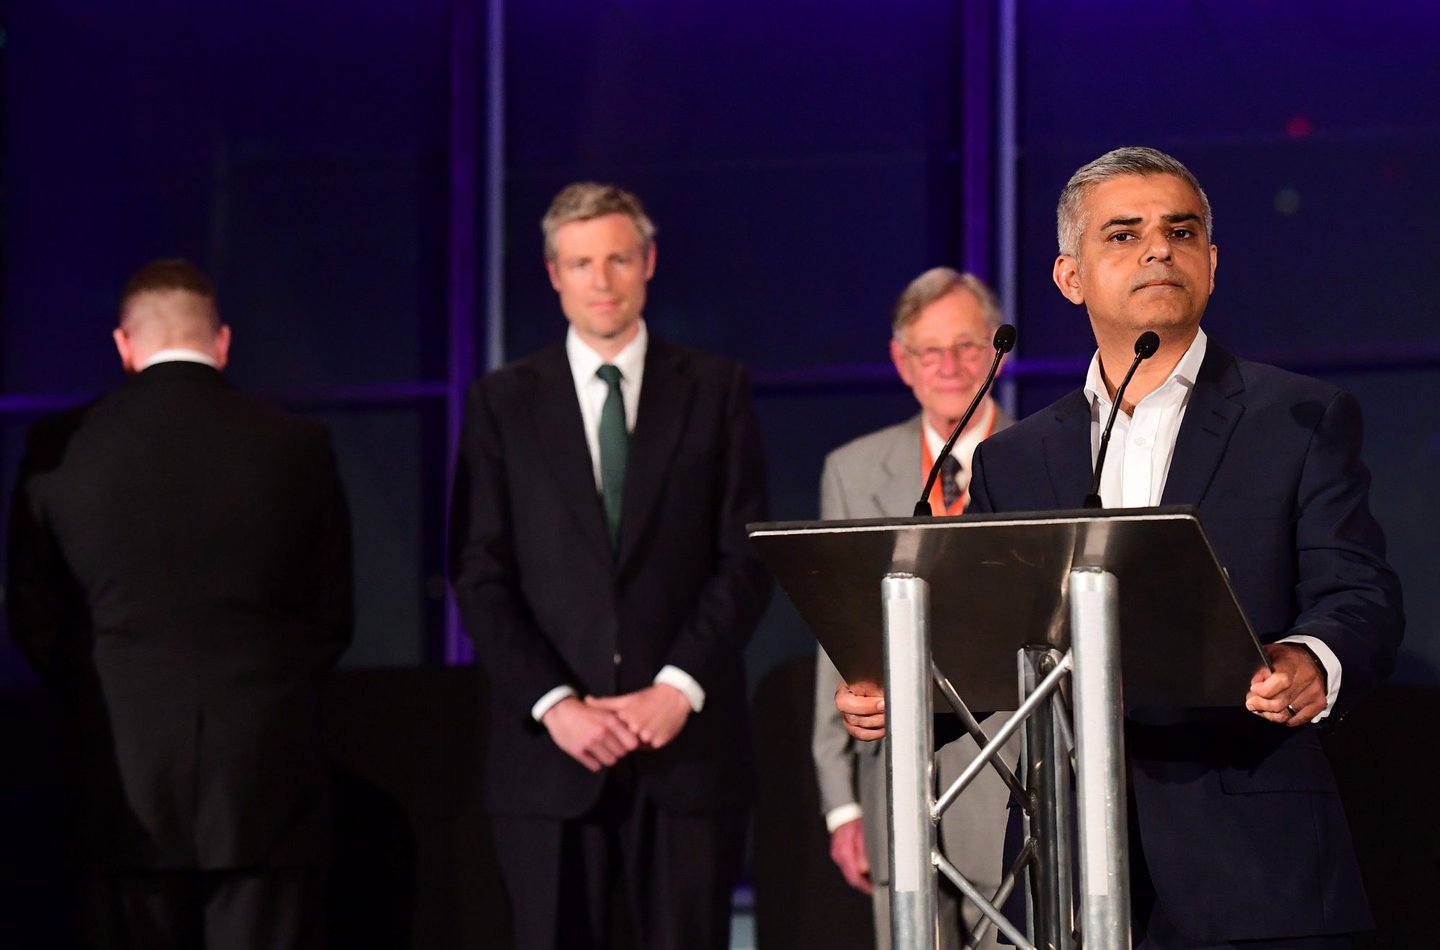 London's new Mayor Sadiq Khan (R) addresses the media as Paul Golding (Far L) the candidate for Britain First, turns his back during the address at City Hall in central London on May 7, 2016. London became the first EU capital with a Muslim mayor Friday as Sadiq Khan won the election that saw his opposition Labour party suffer nationwide setbacks. / AFP / LEON NEAL (Photo credit should read LEON NEAL/AFP/Getty Images)